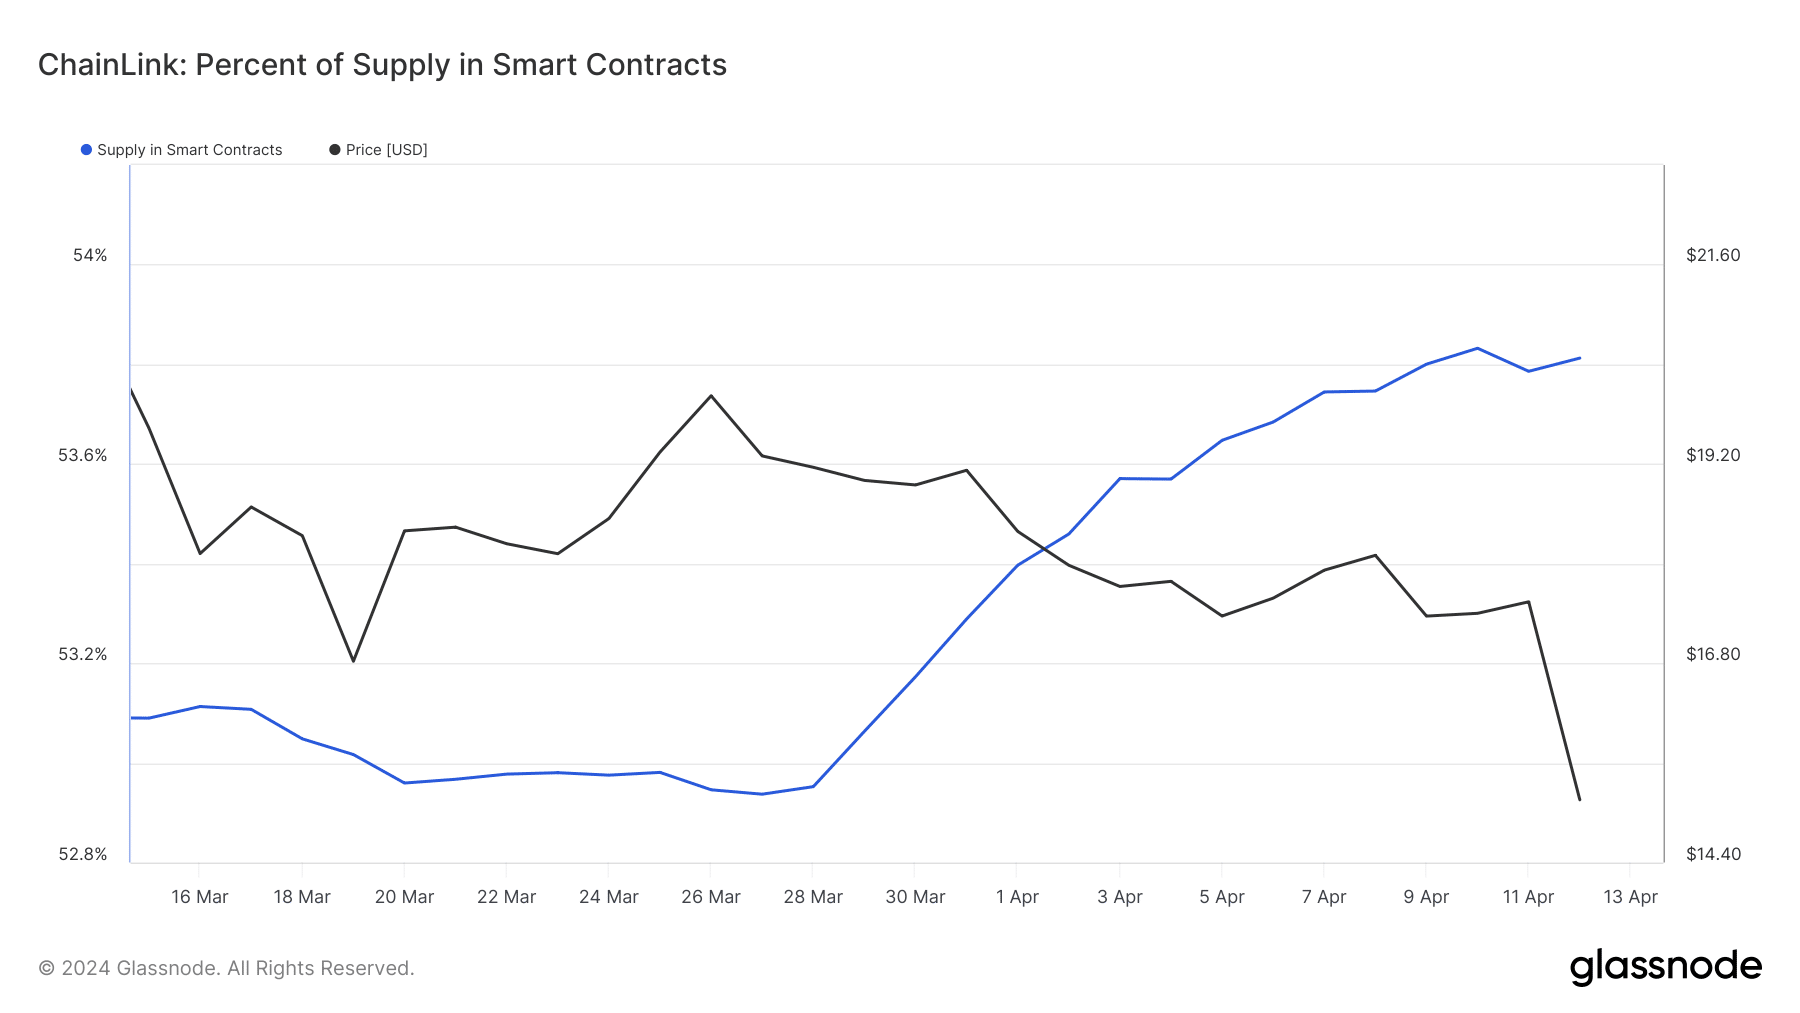 Chainlink increases supply of smart contracts